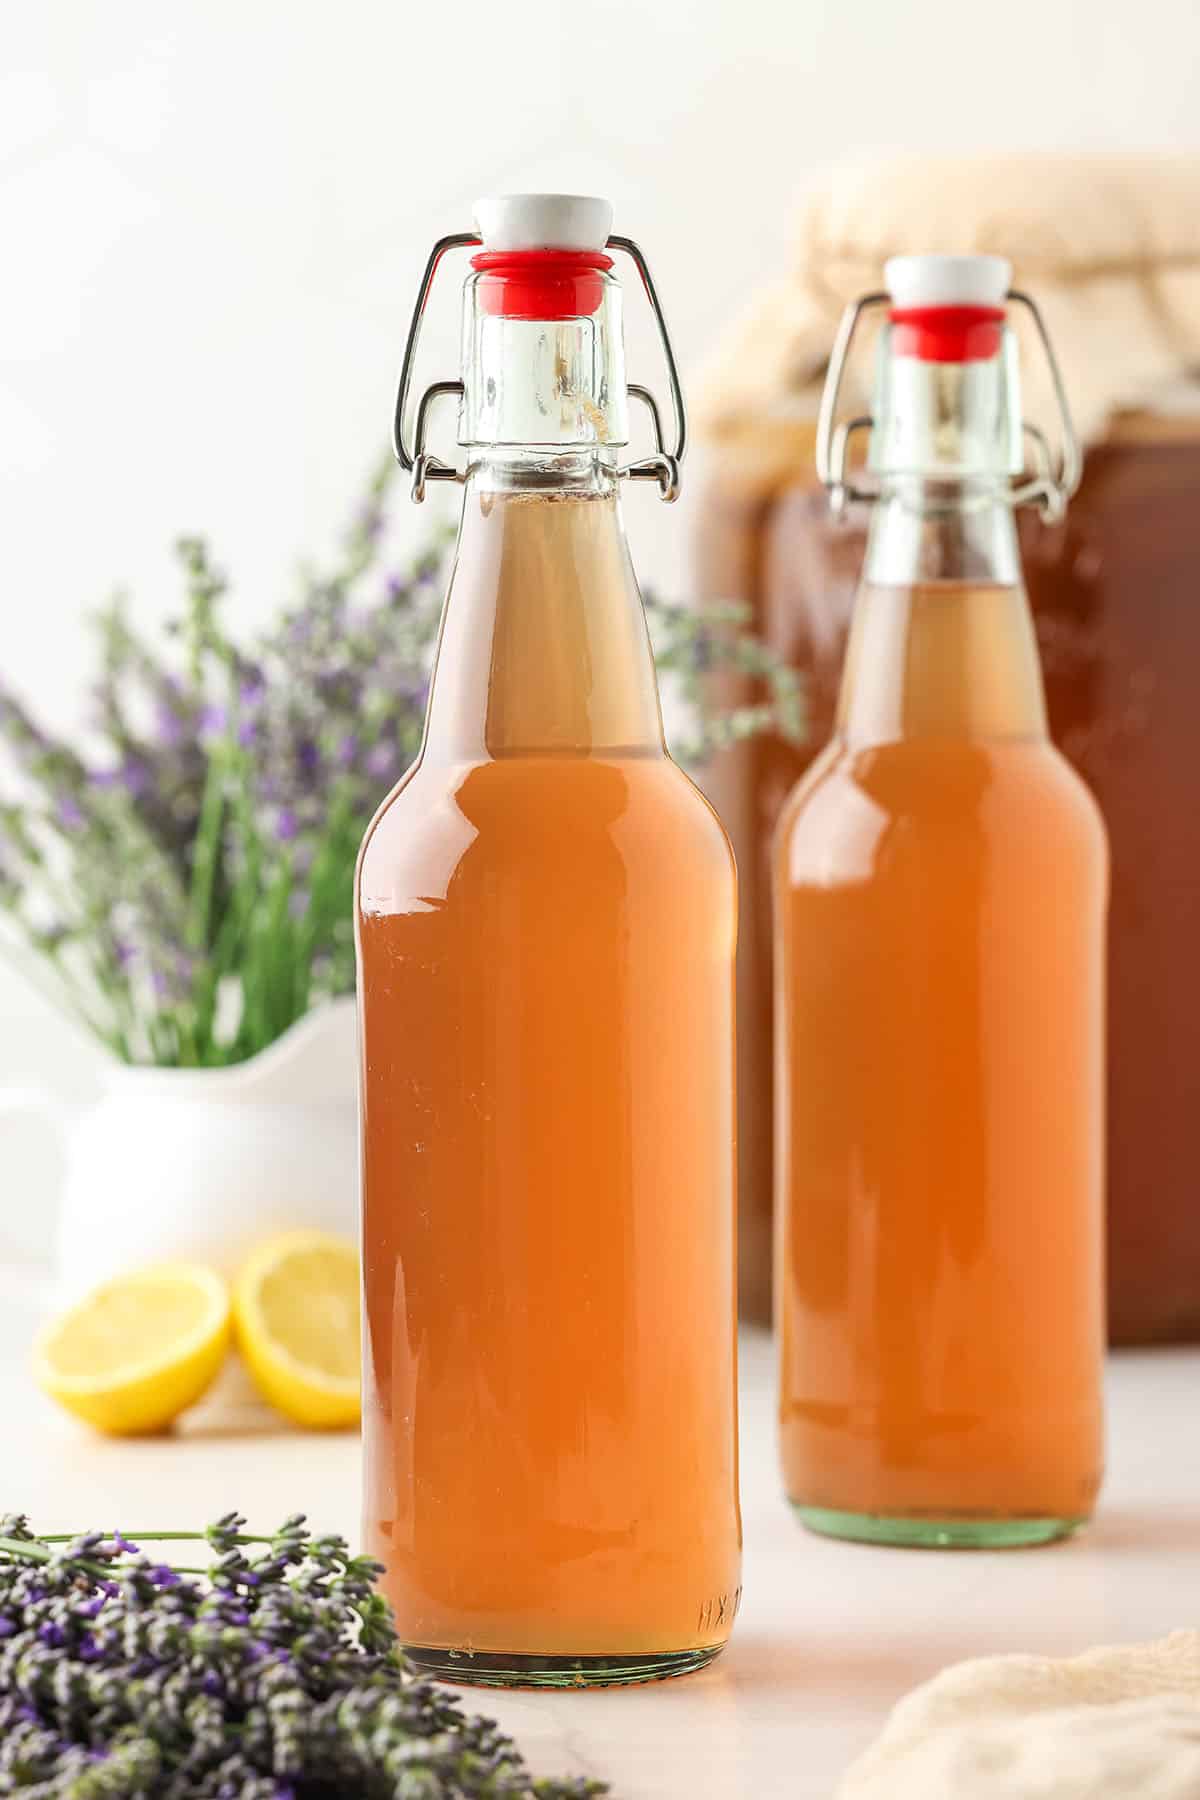 Bottles of lavender kombucha on a white surface surrounded by fresh lavender and lemons.